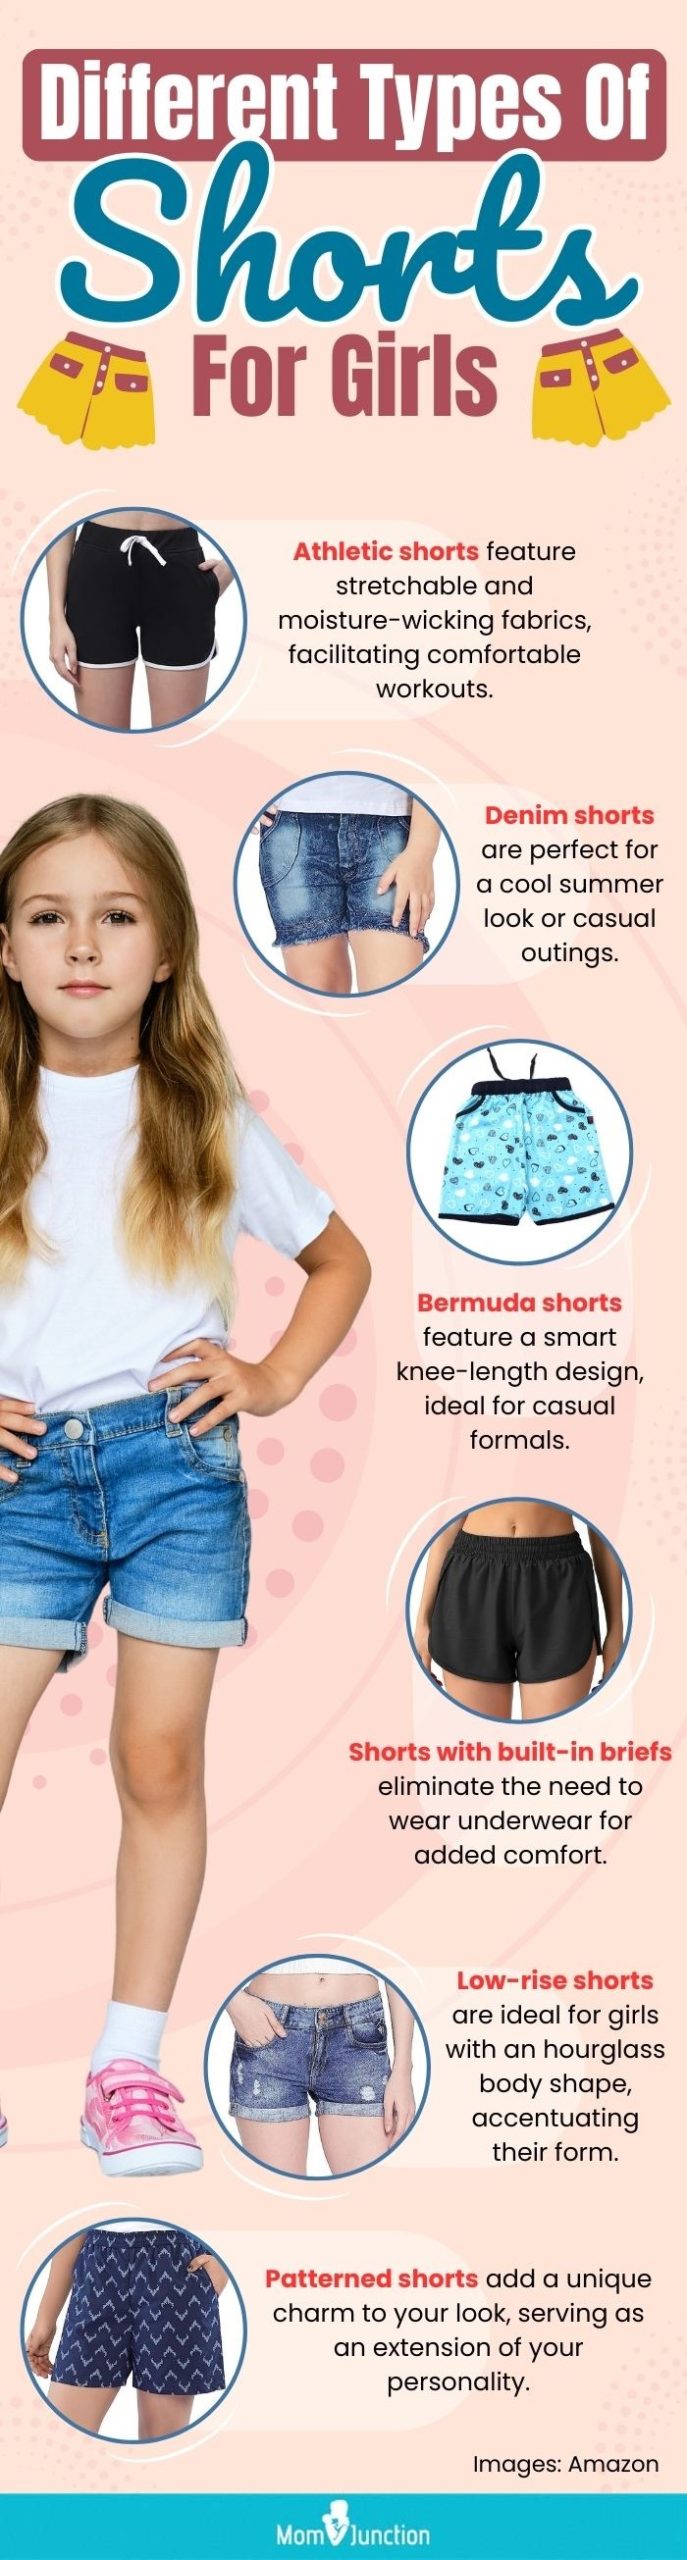 Different Types Of Shorts For Girls (infographic)